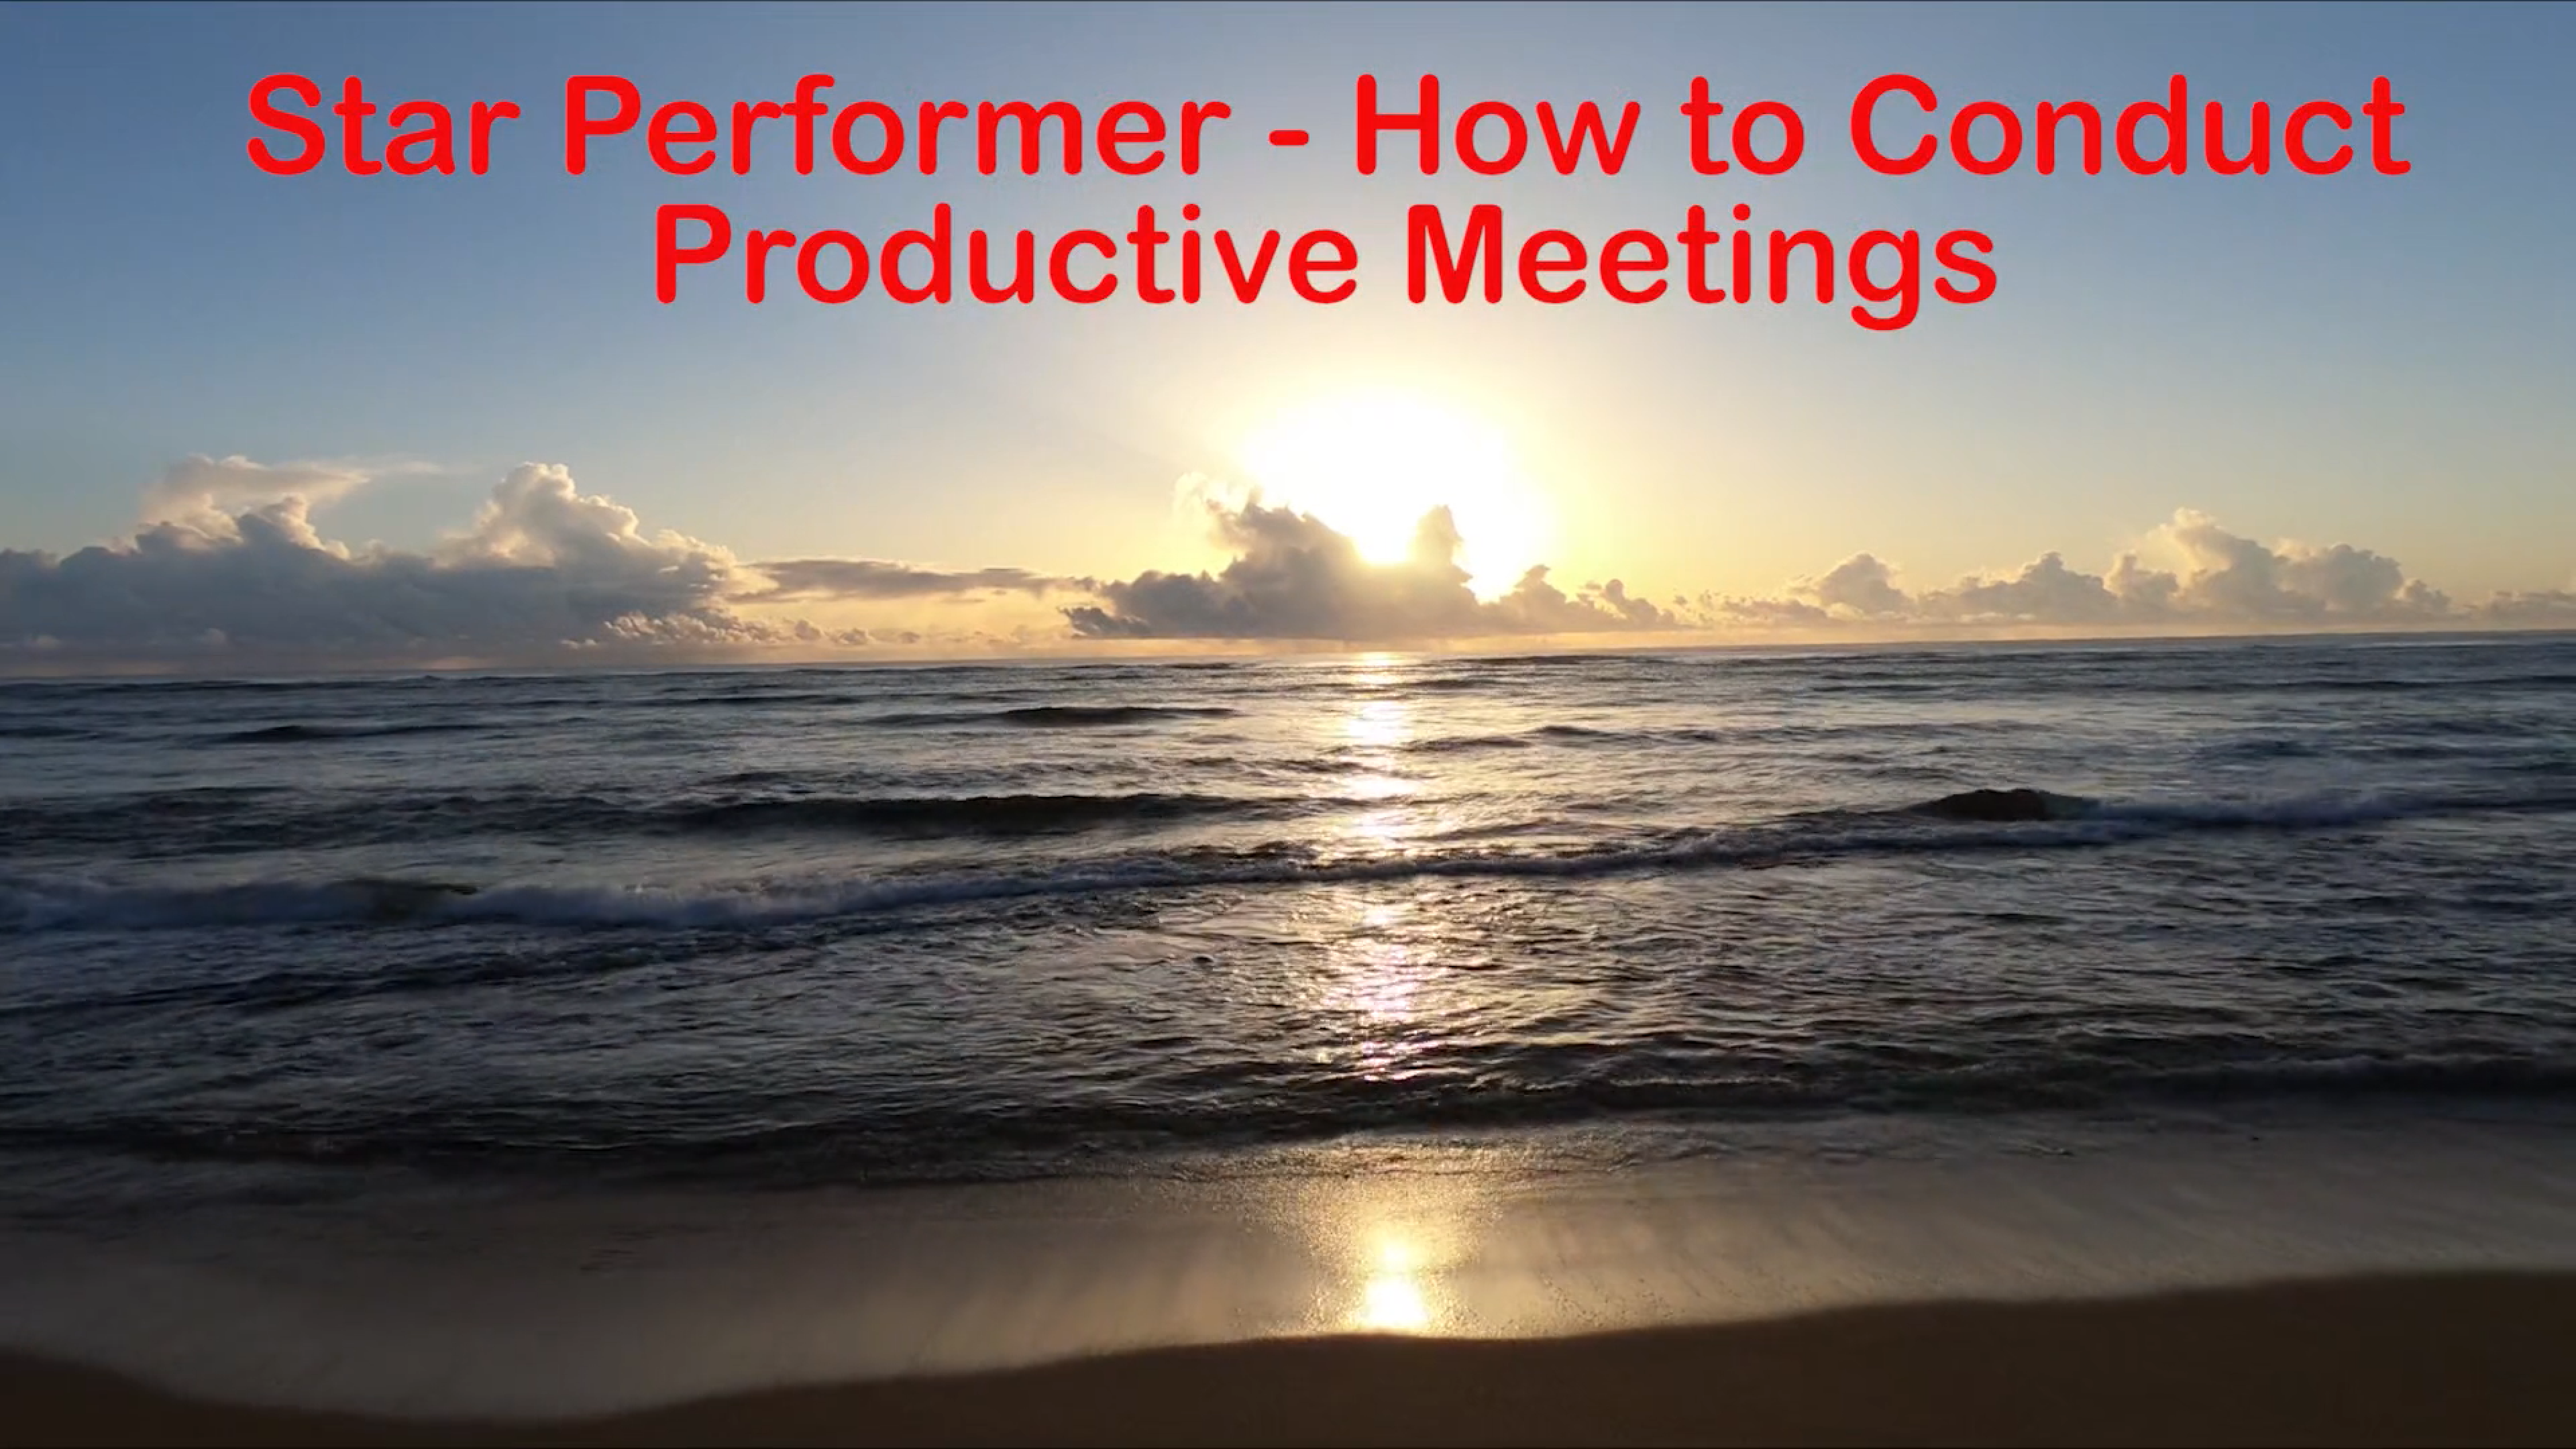 Star Performer - How to Conduct Productive Meetings Copyright 2018 by Steve J Davis. All Rights Reserved. https://starperformer.info